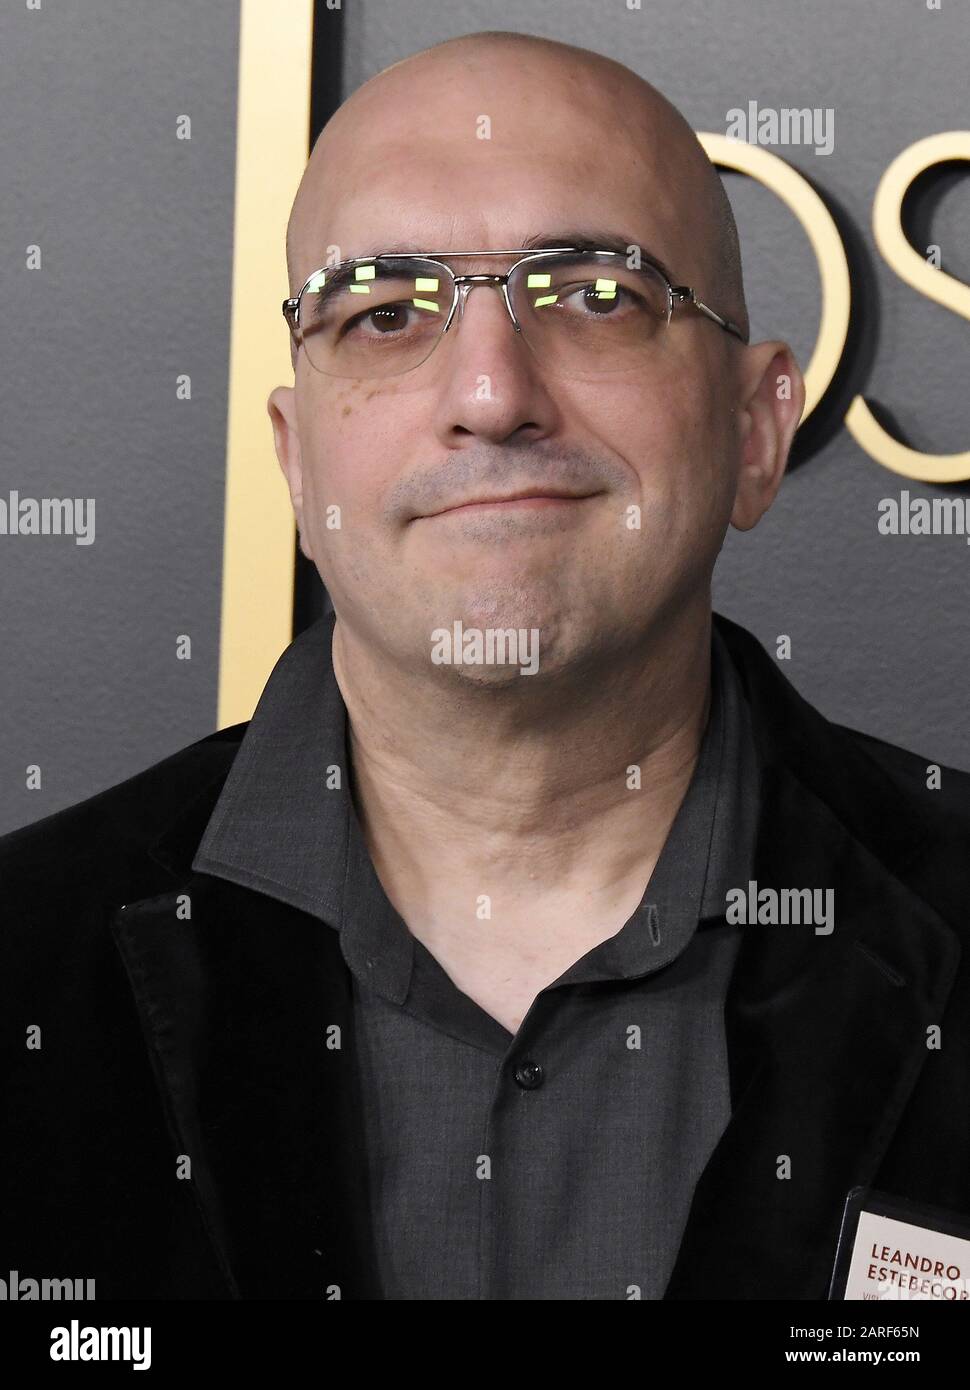 Leandro Estebecorena arrives at the 92nd Oscars Nominees Luncheon held at the Ray Dolby Ballroom at Hollywood & Highland in Hollywood, CA on Monday, ?January 27, 2020.  (Photo By Sthanlee B. Mirador/Sipa USA) Stock Photo